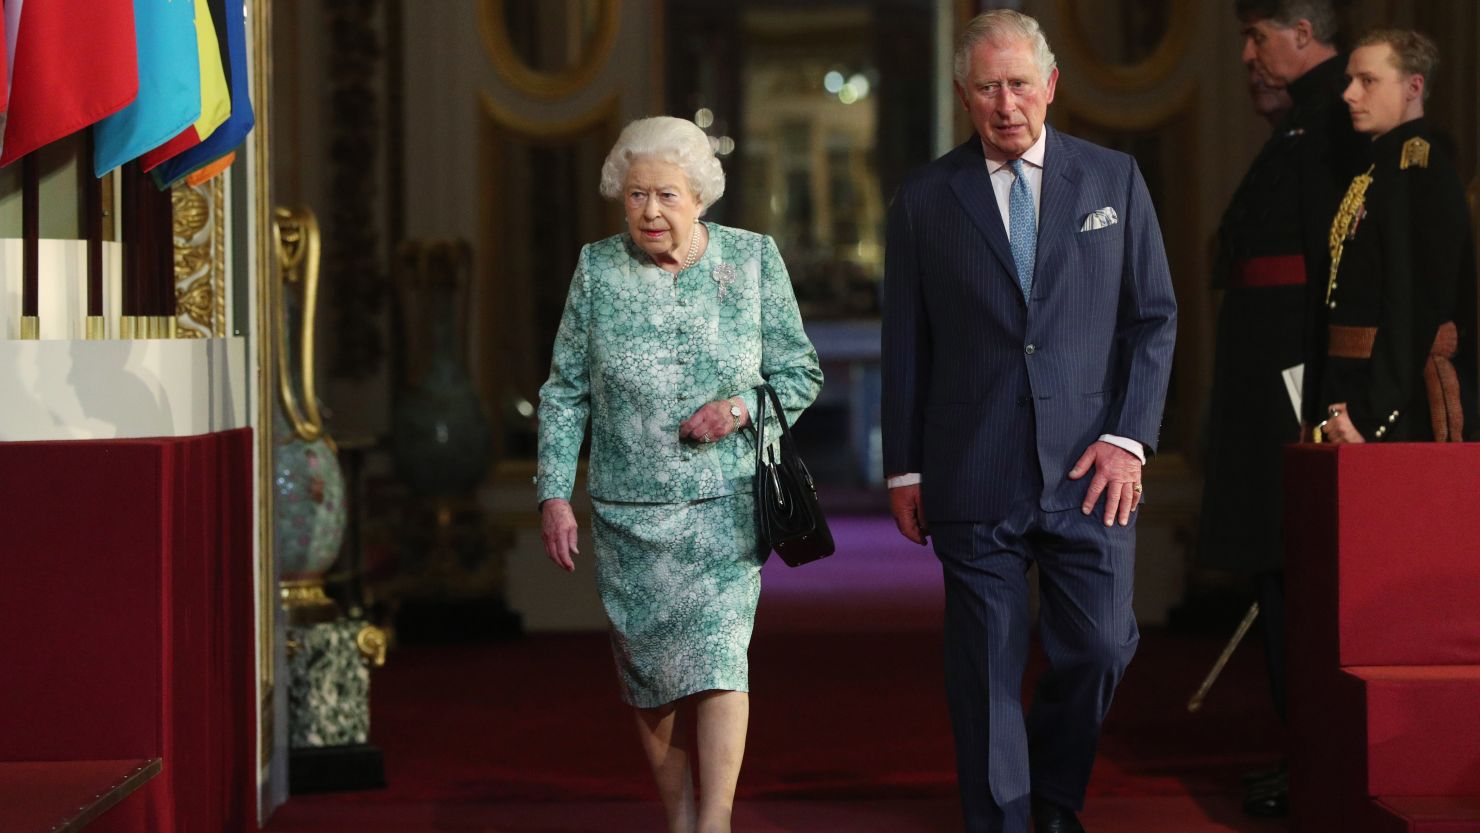 Queen Elizabeth II and Prince Charles attend the formal opening Thursday of the Commonwealth Heads of Government Meeting at Buckingham Palace.